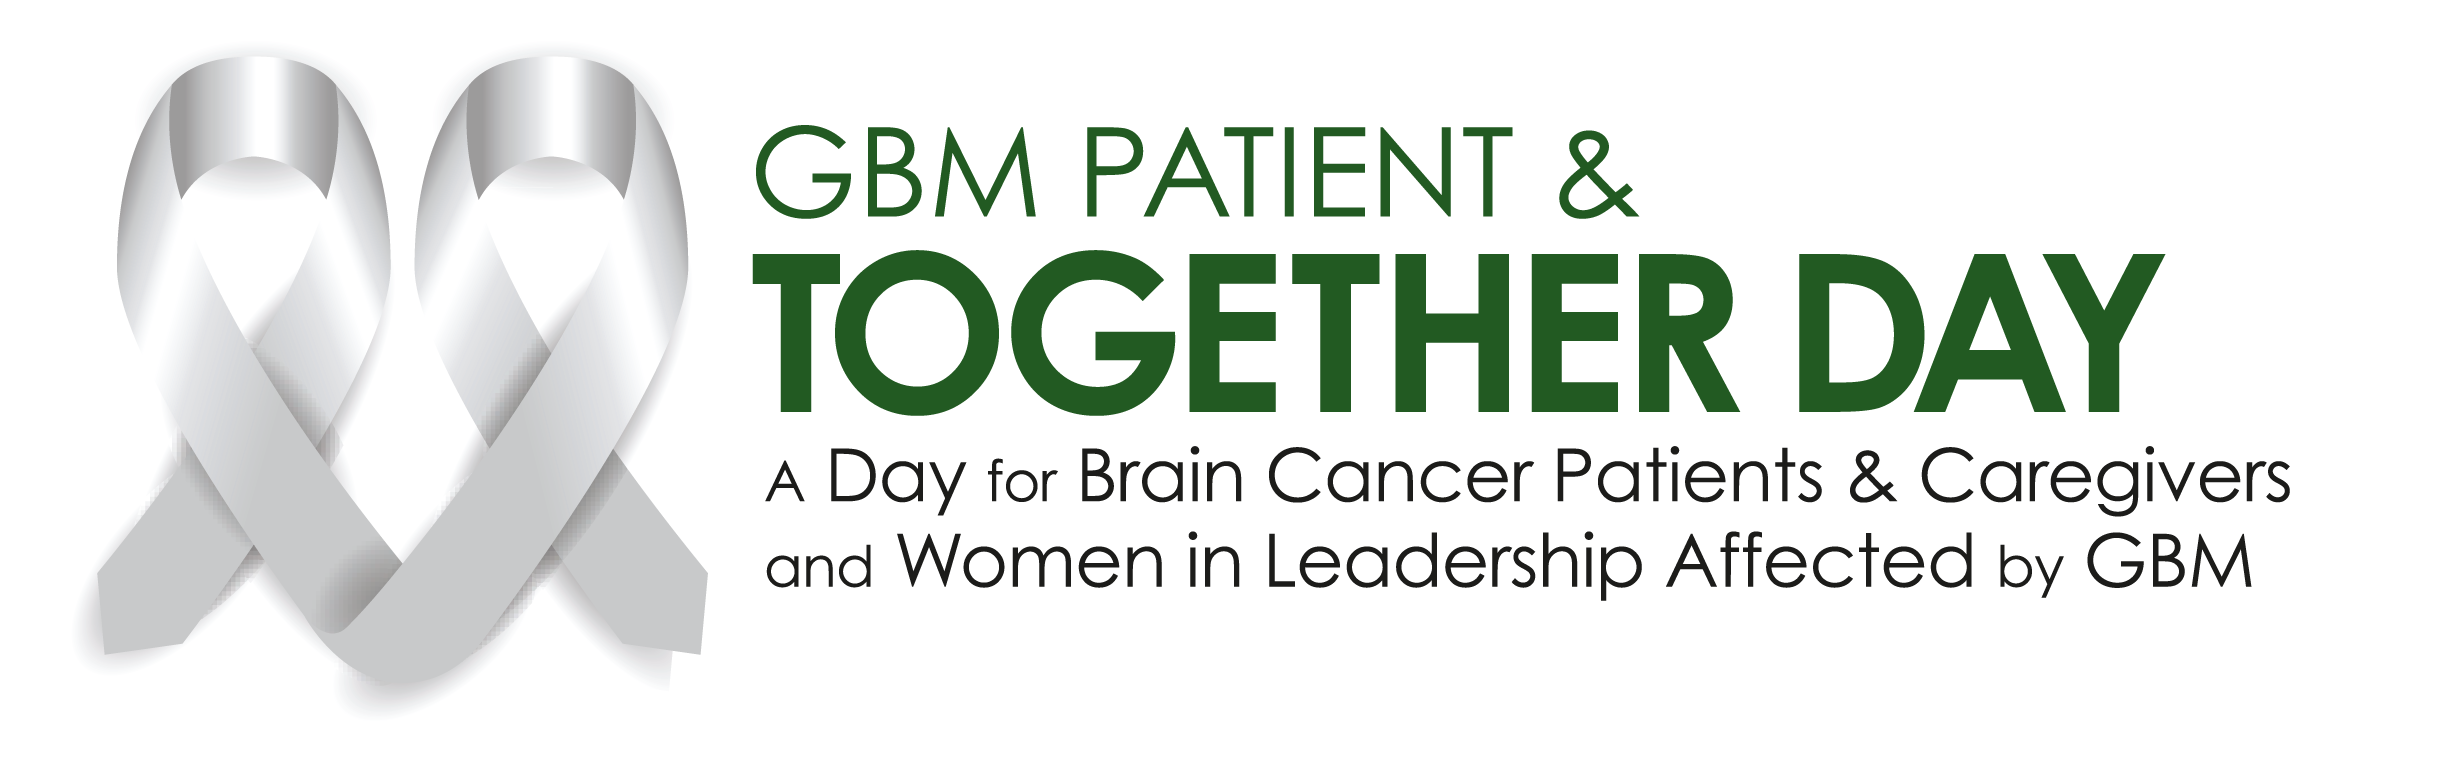 GBM Patient & TOGETHER Day - 3.15.19